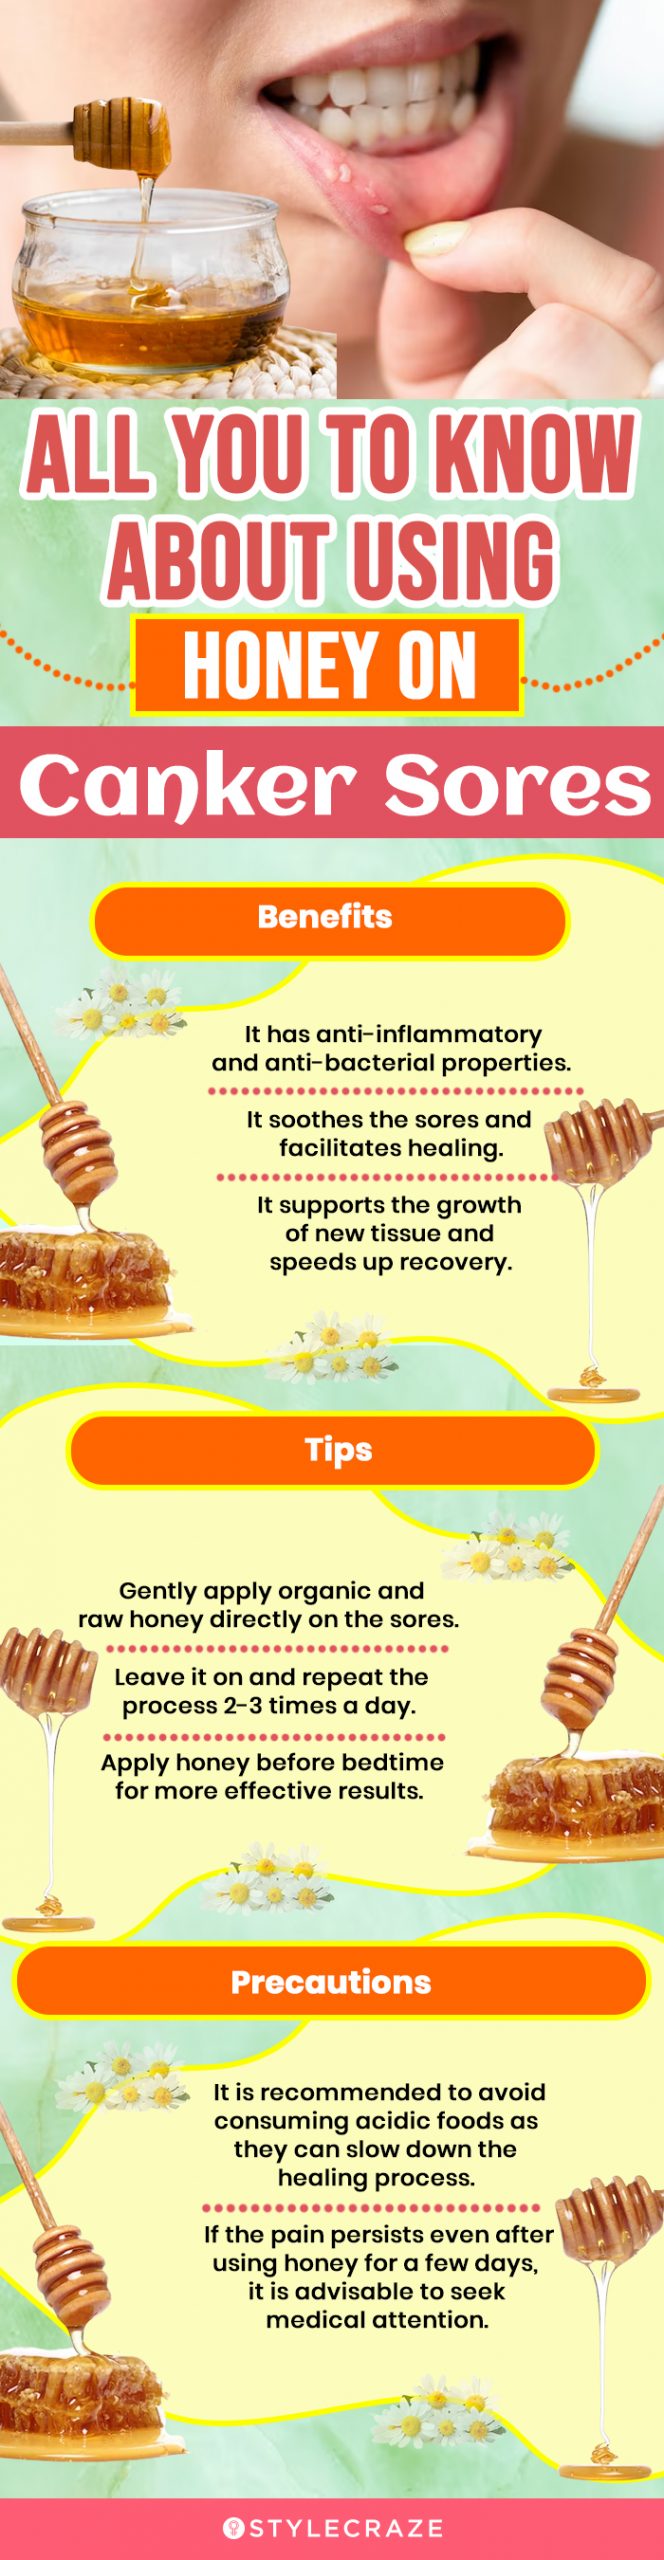 all you need to know about using honey on canker sores (infographic)